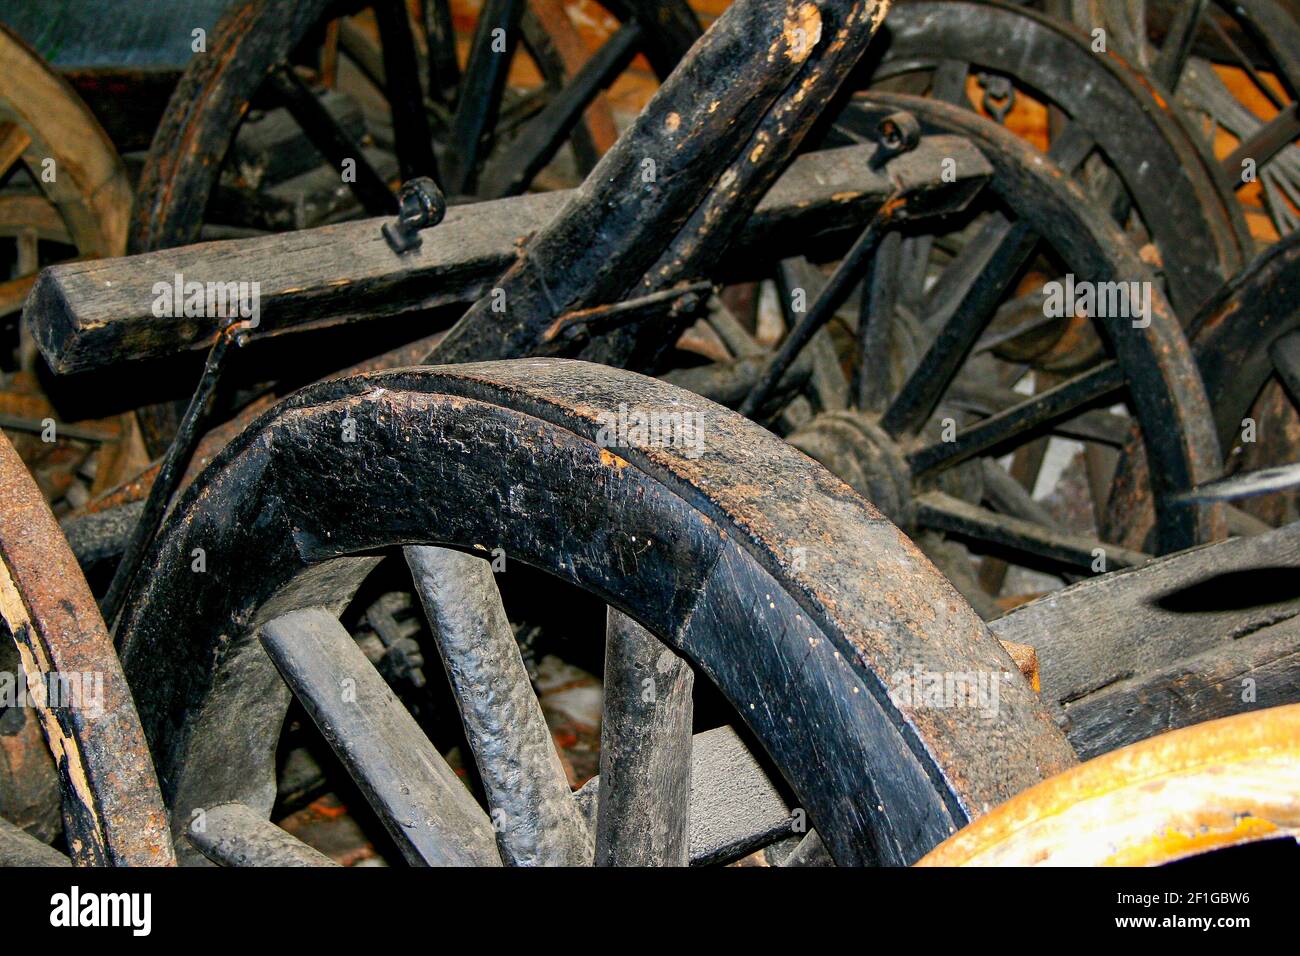 A closeup of old carriages and wagon wheels in a barn Stock Photo